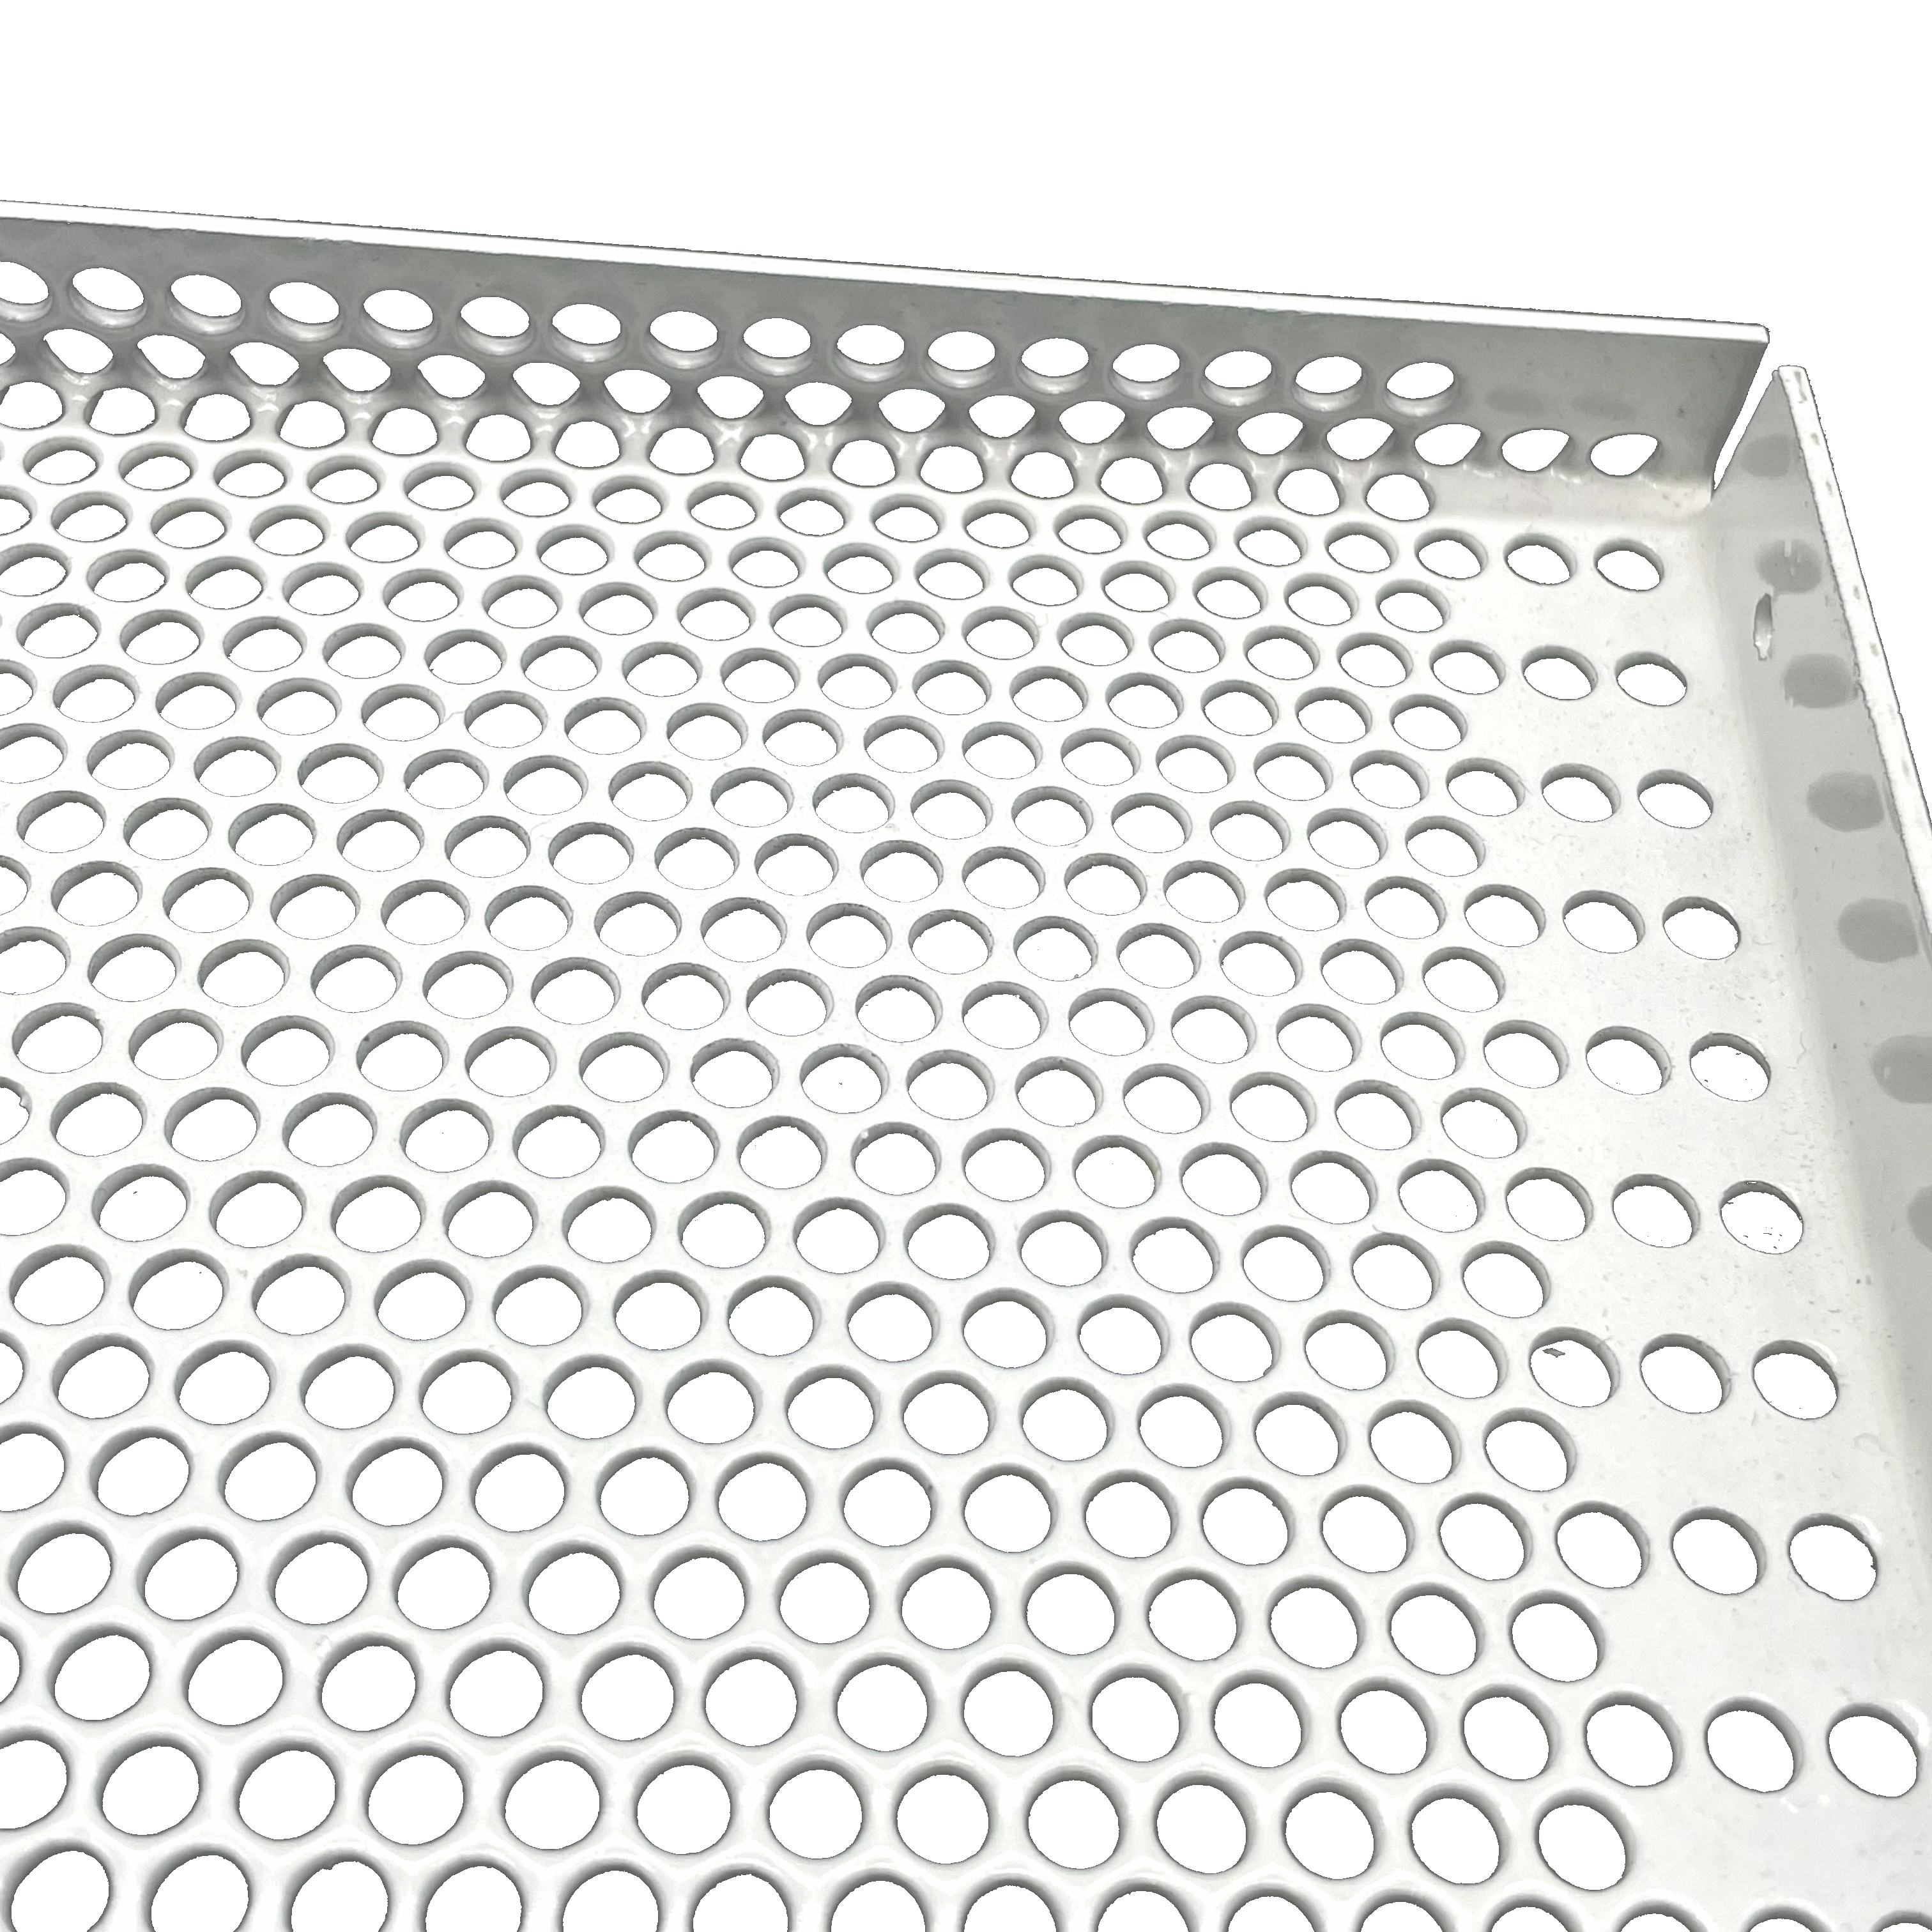 Buy Perforated Plastic Mesh Sheets For Speaker Car Grills from Chongqing  Sunner Import and Export Co., Ltd., China